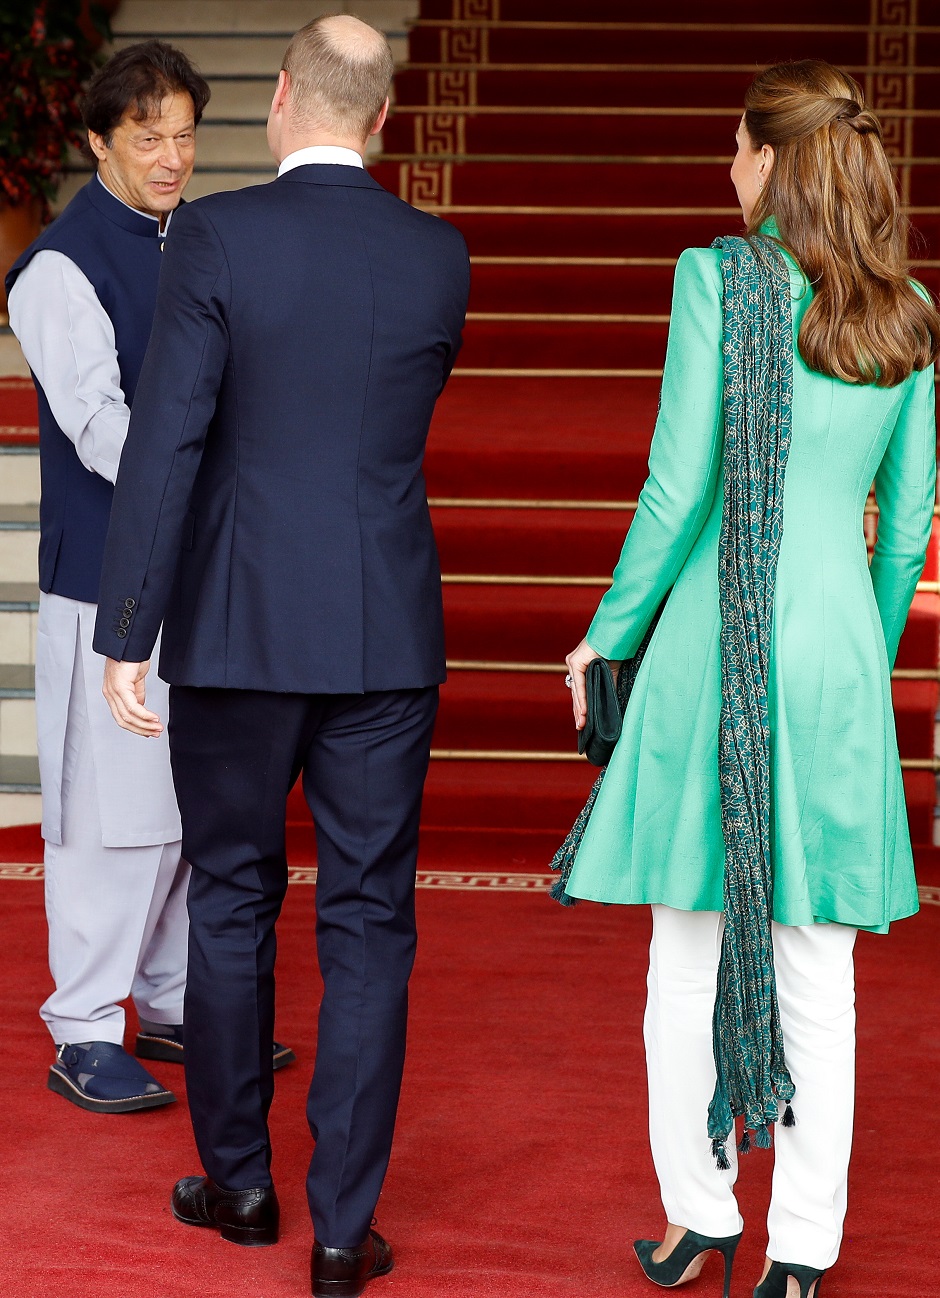 Prime Minister Imran Khan welcomes Britain's Prince William and Catherine, Duchess of Cambridge, in Islamabad, Pakistan. PHOTO: REUTERS